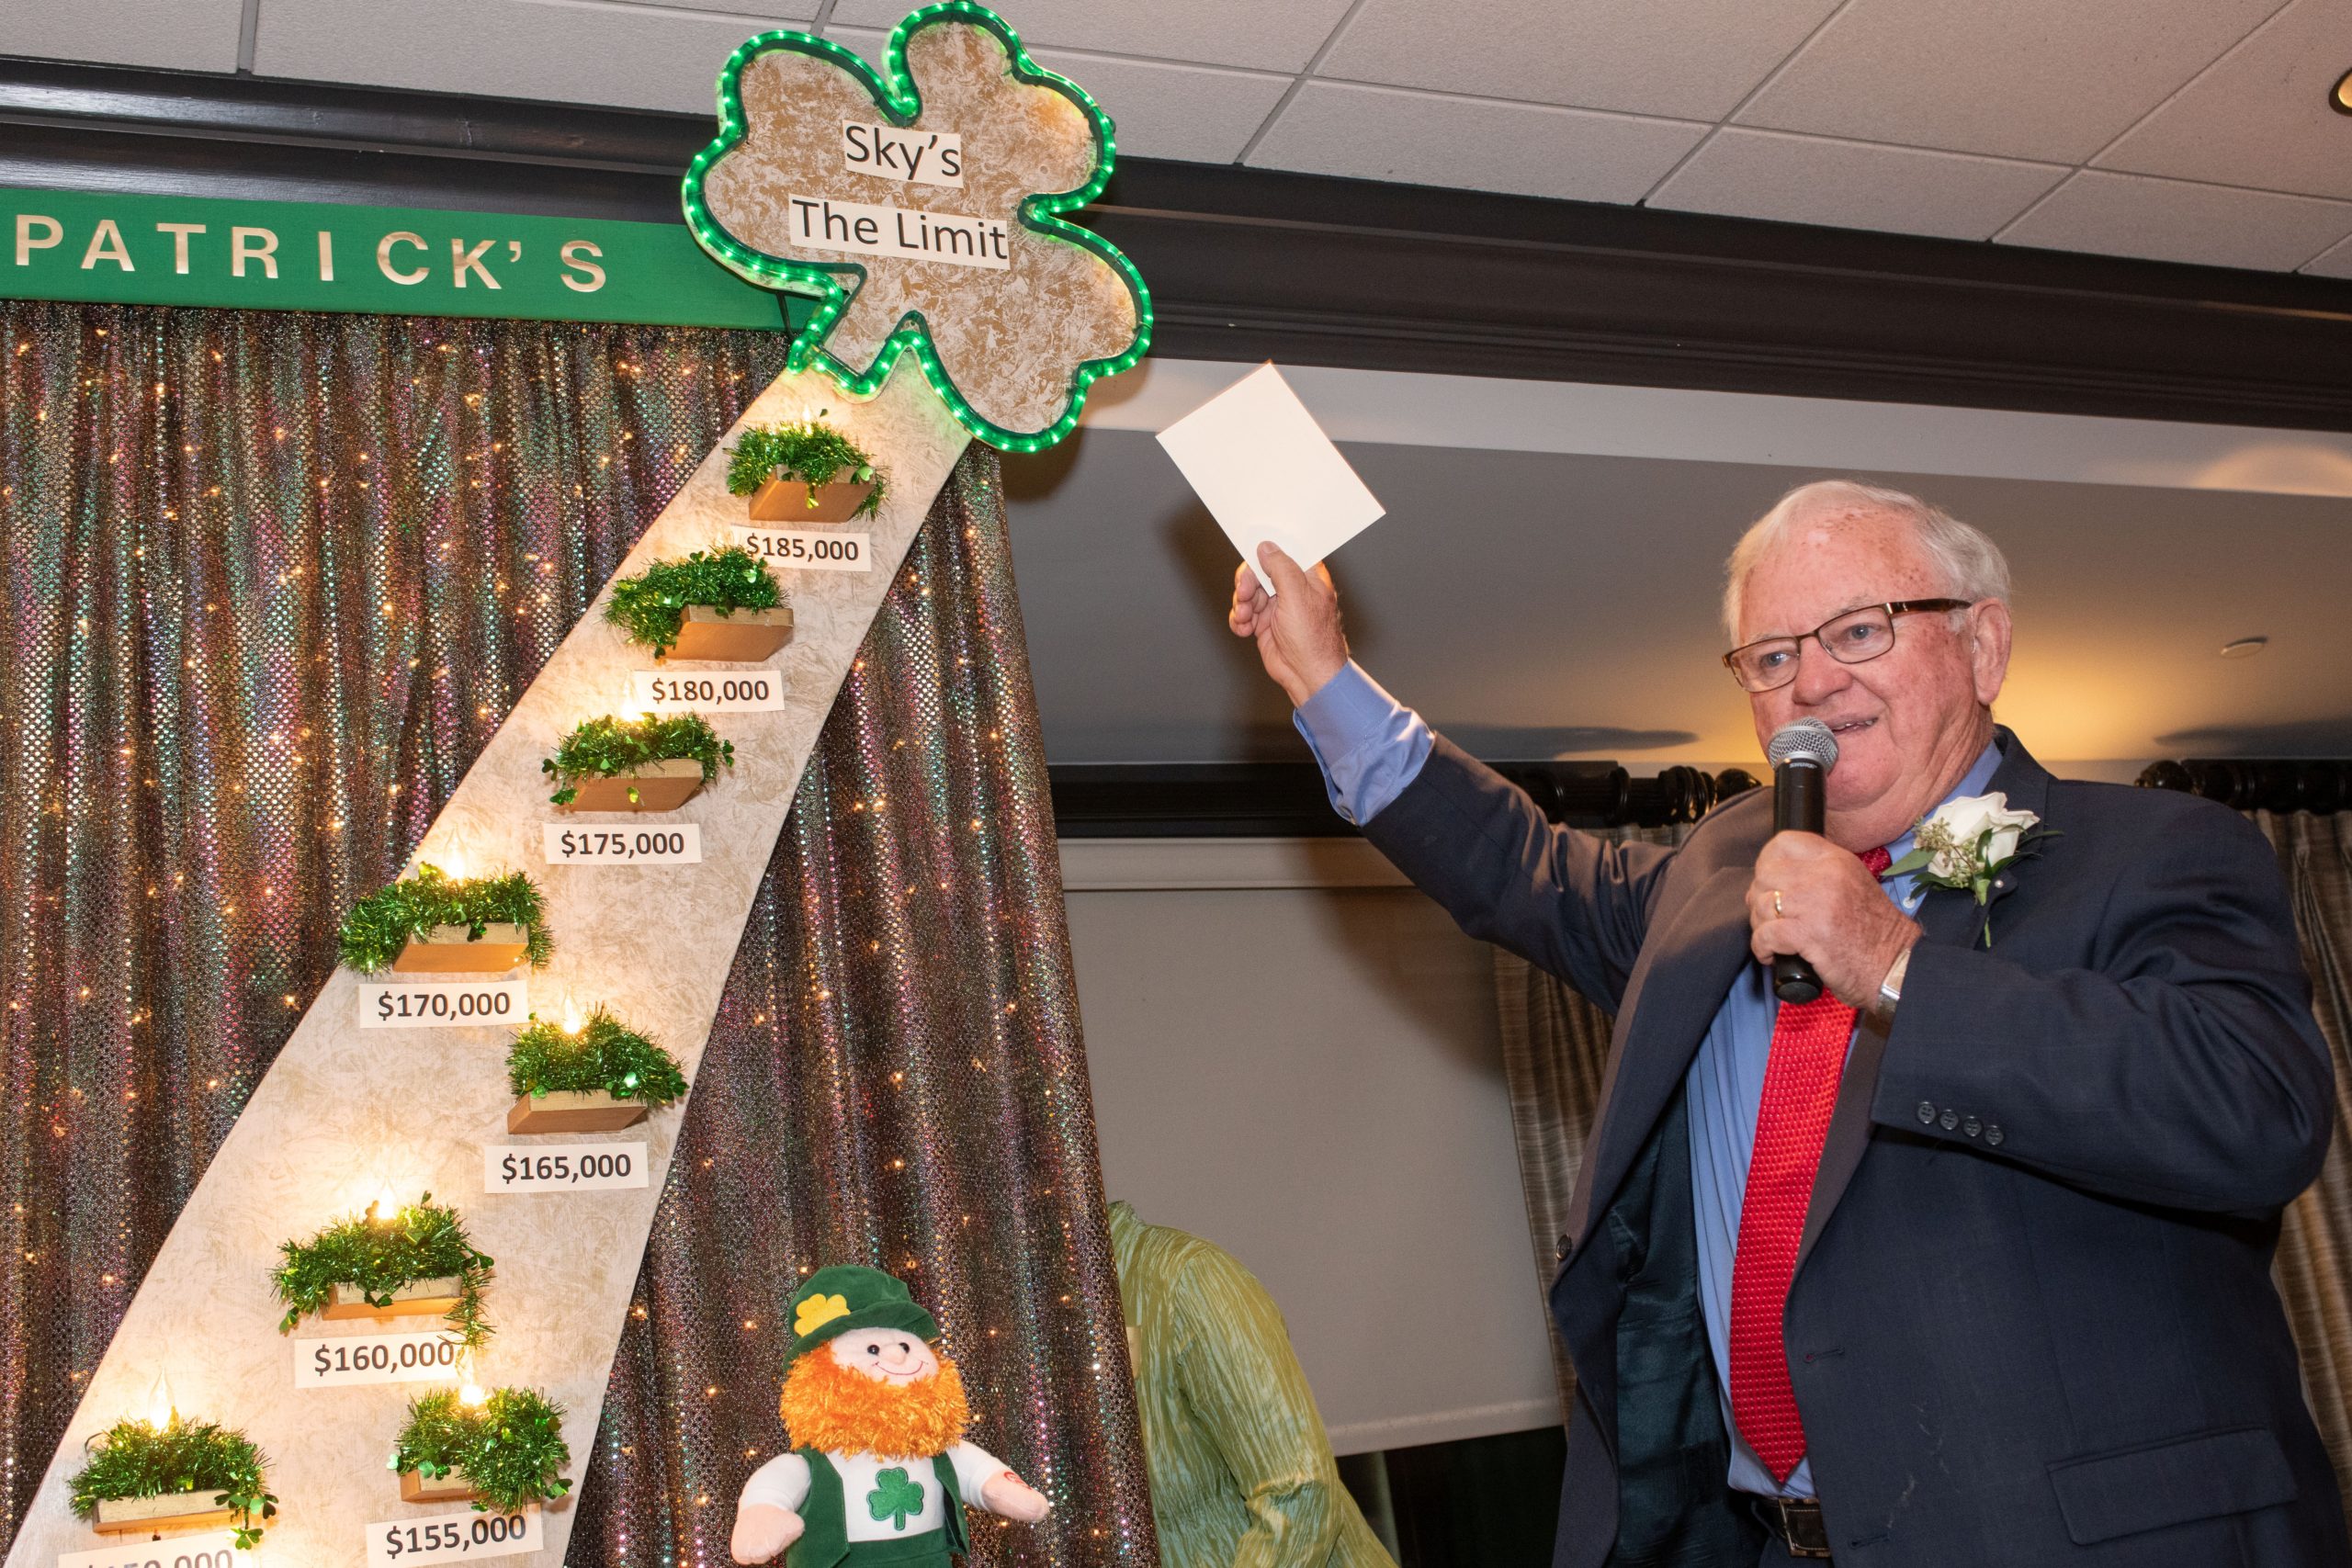 At St. Patrick's Residence we hold lots of fun activities and celebrations to keep our residence happy and active.